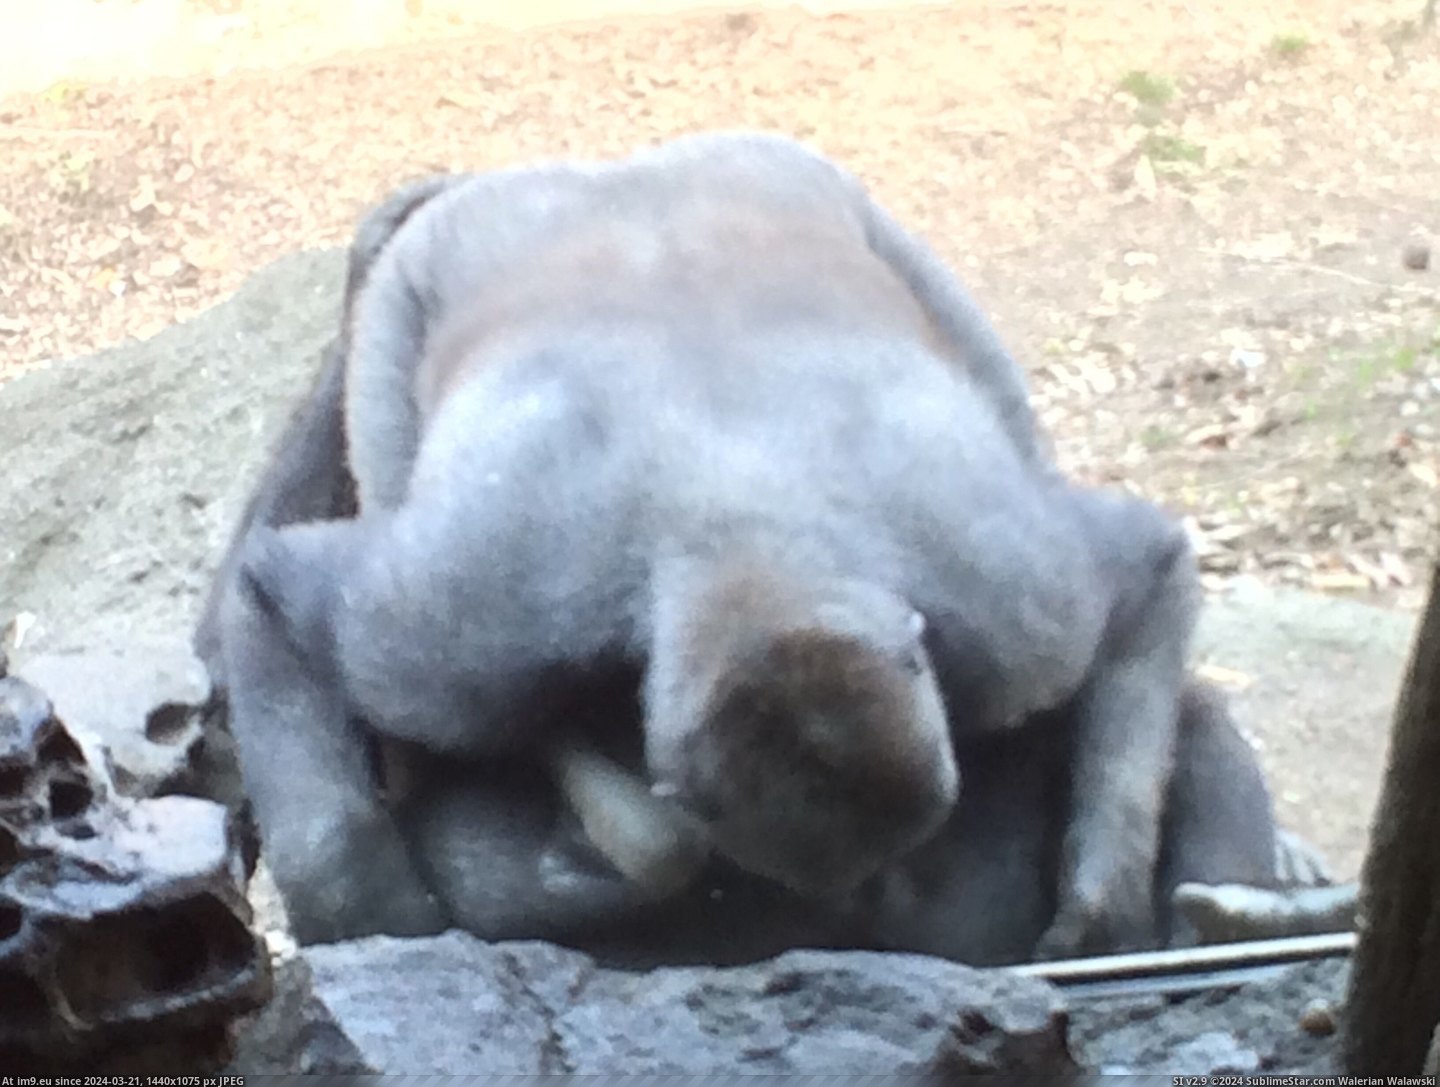 #Two #Front #Children #Bronx #Gorillas #Zoo #Crowd #Watched [Pics] Went to the Bronx Zoo yesterday. Watched two gorillas 69 in front of a crowd of children. Pic. (Image of album My r/PICS favs))